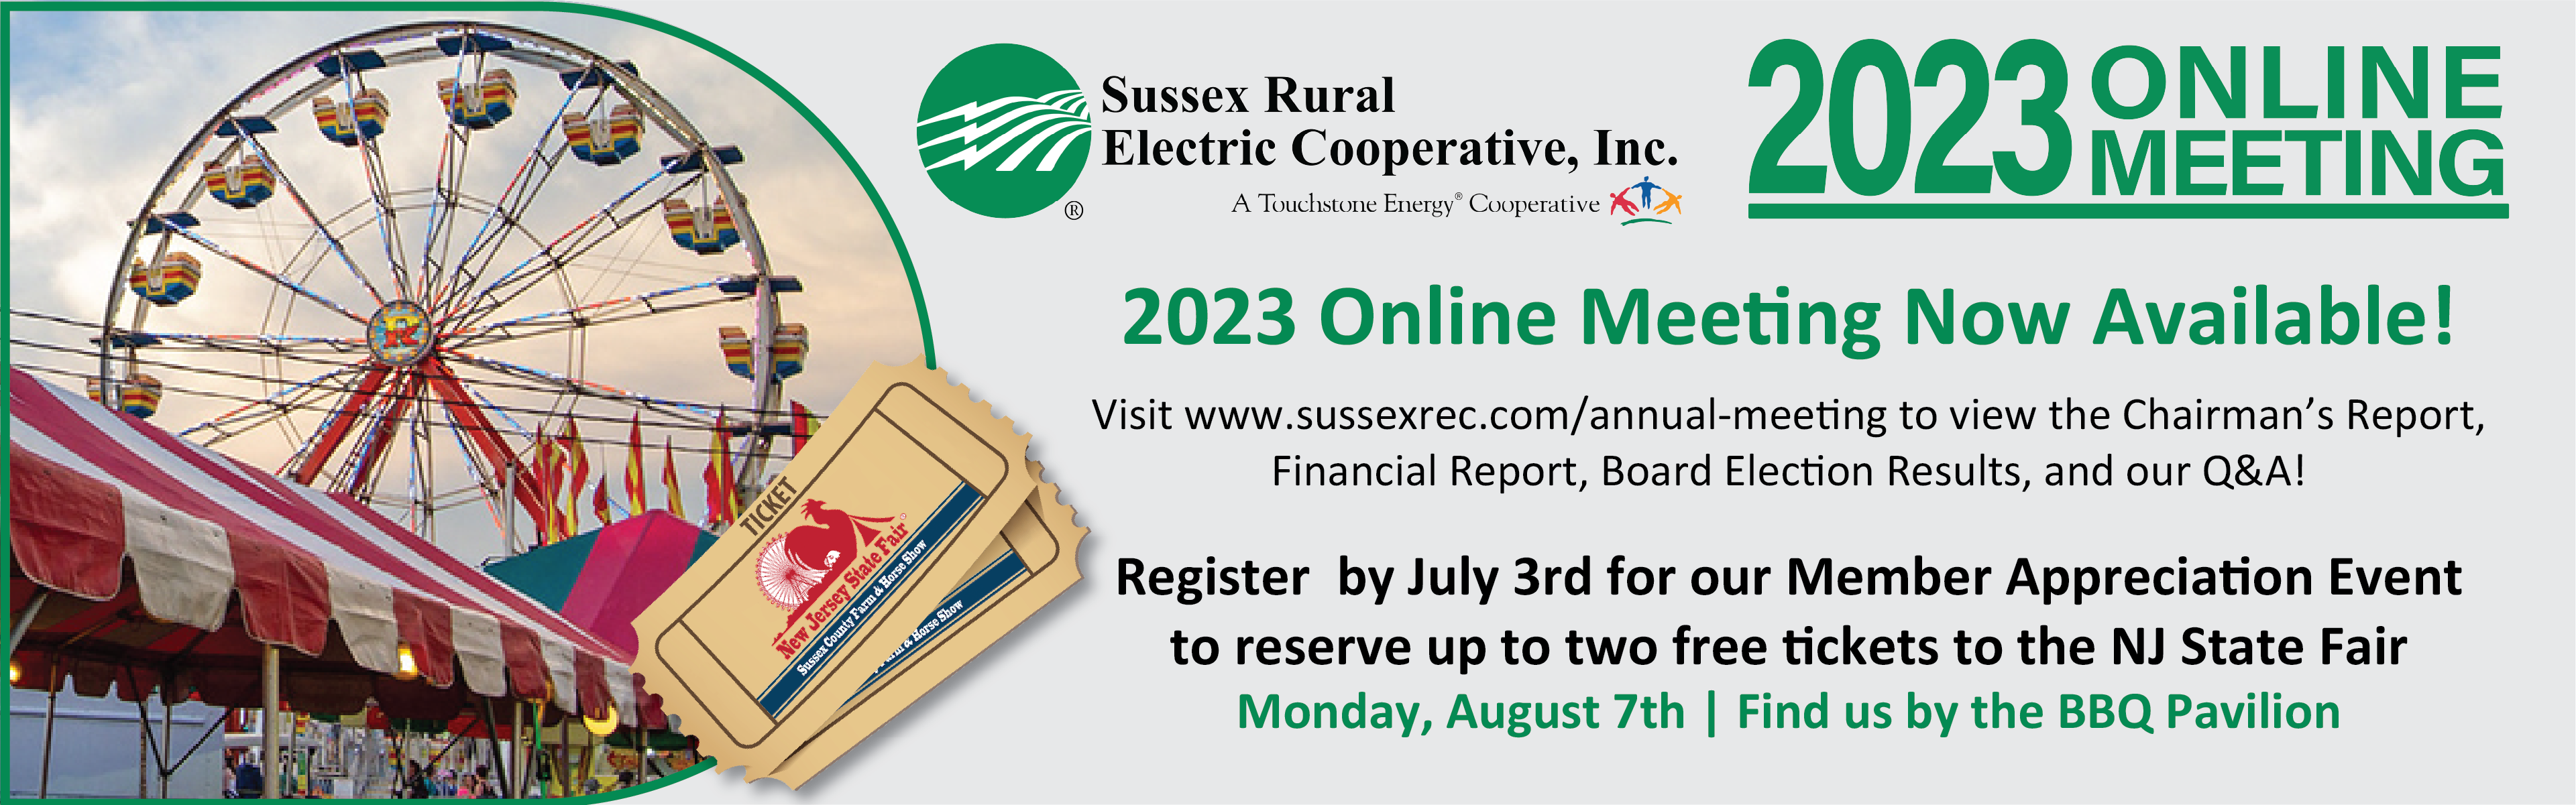 Sussex Rural Electric Cooperative, Inc. 2023 Online Meeting - 2023 Online Meeting Now Available! Visit www.sussexrec.com/annual-meeting to view the Chairman's Report, Financial Report, Board Election Results, and our Q&A! Register by July 3rd for our Member Appreciation Event to reserve up to two free tickets to the NJ State Fair - Monday, August 7th | Find us at the BBQ Pavilion